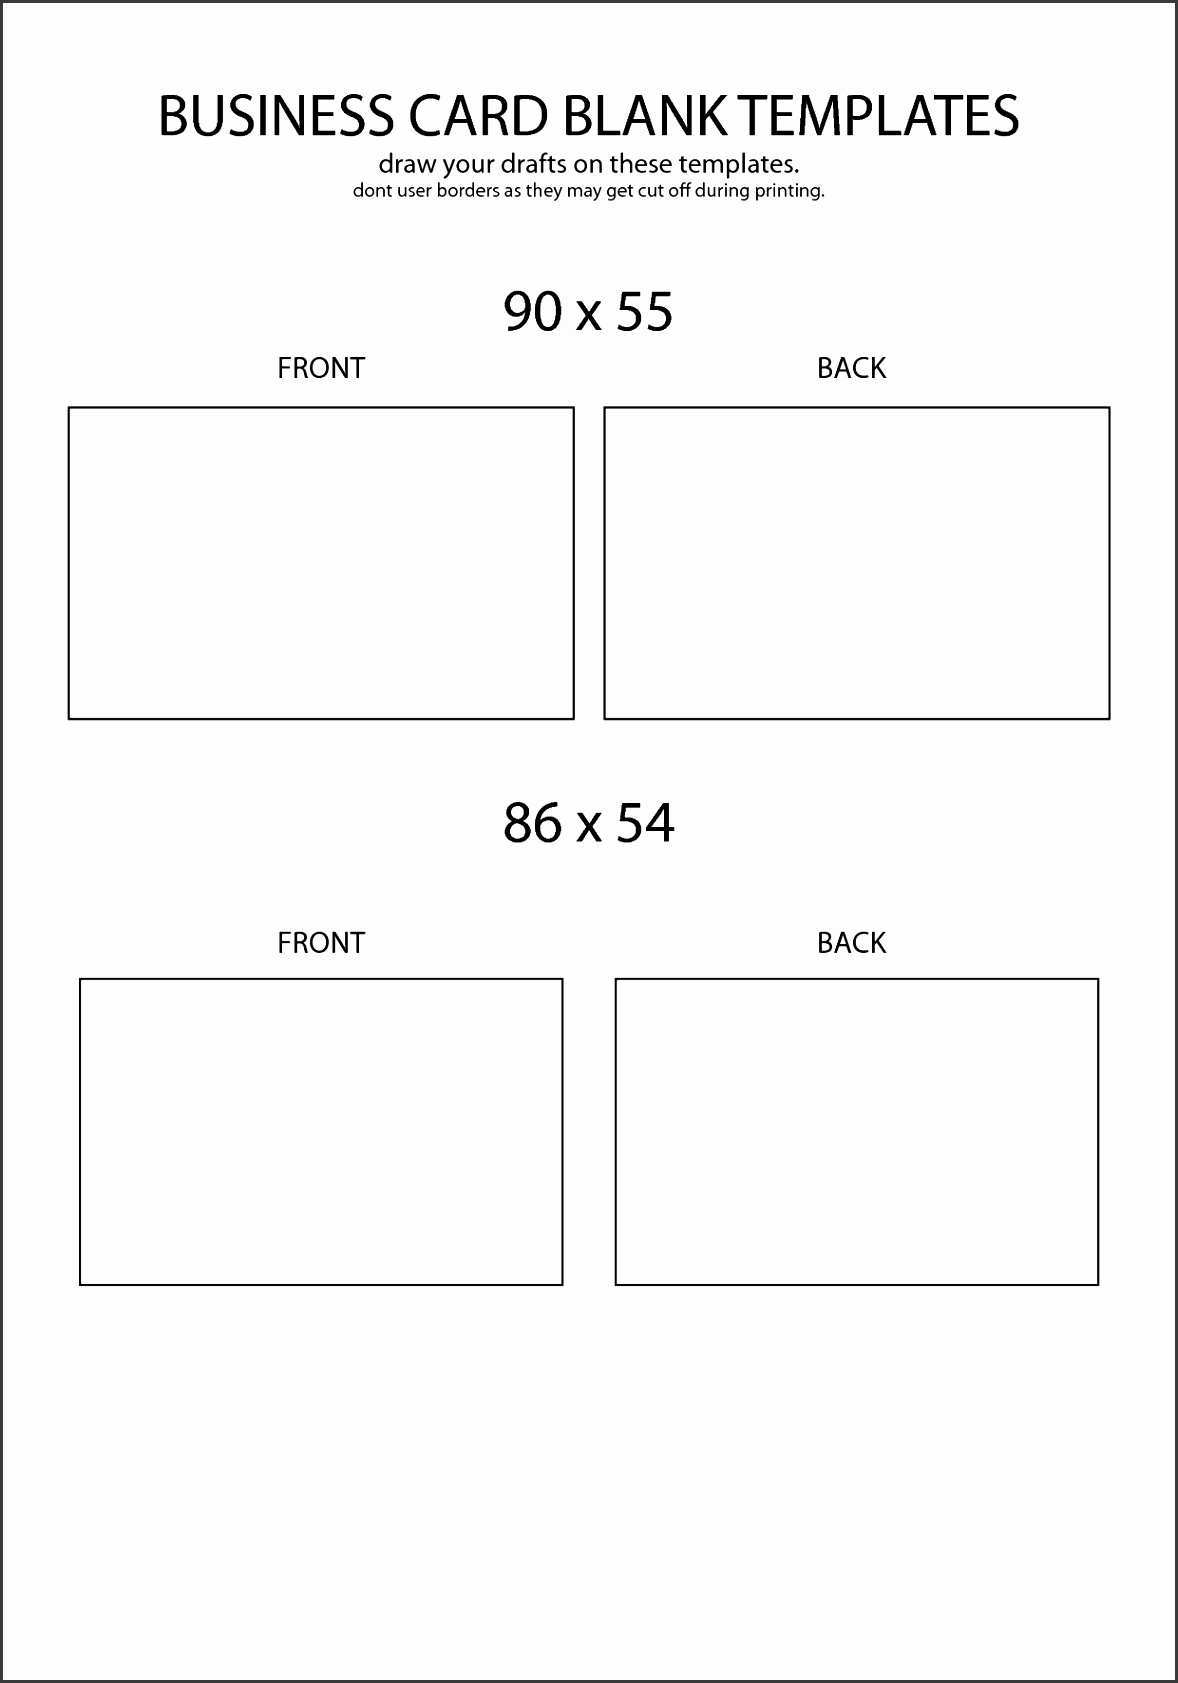 8 Blank Business Card Template Word 2013 – Sampletemplatess Throughout Plain Business Card Template Microsoft Word